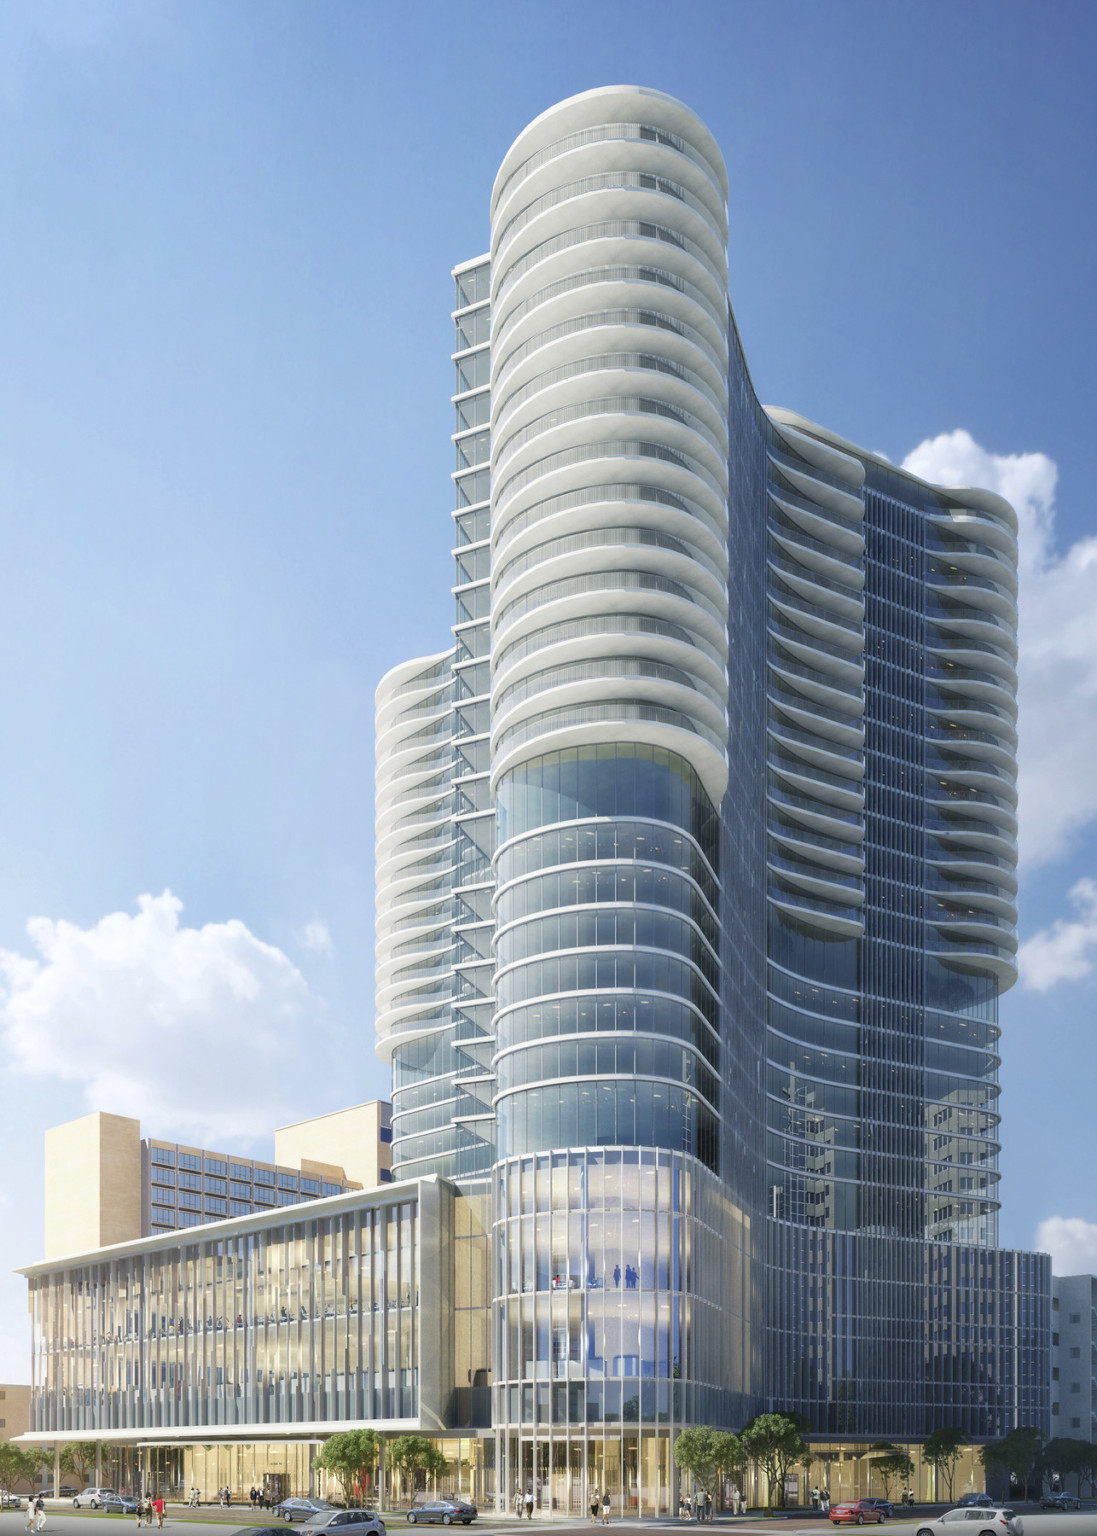 Front view of 33 story glass building with shaded upper balconies and rounded tower at front. Right wall curves into building